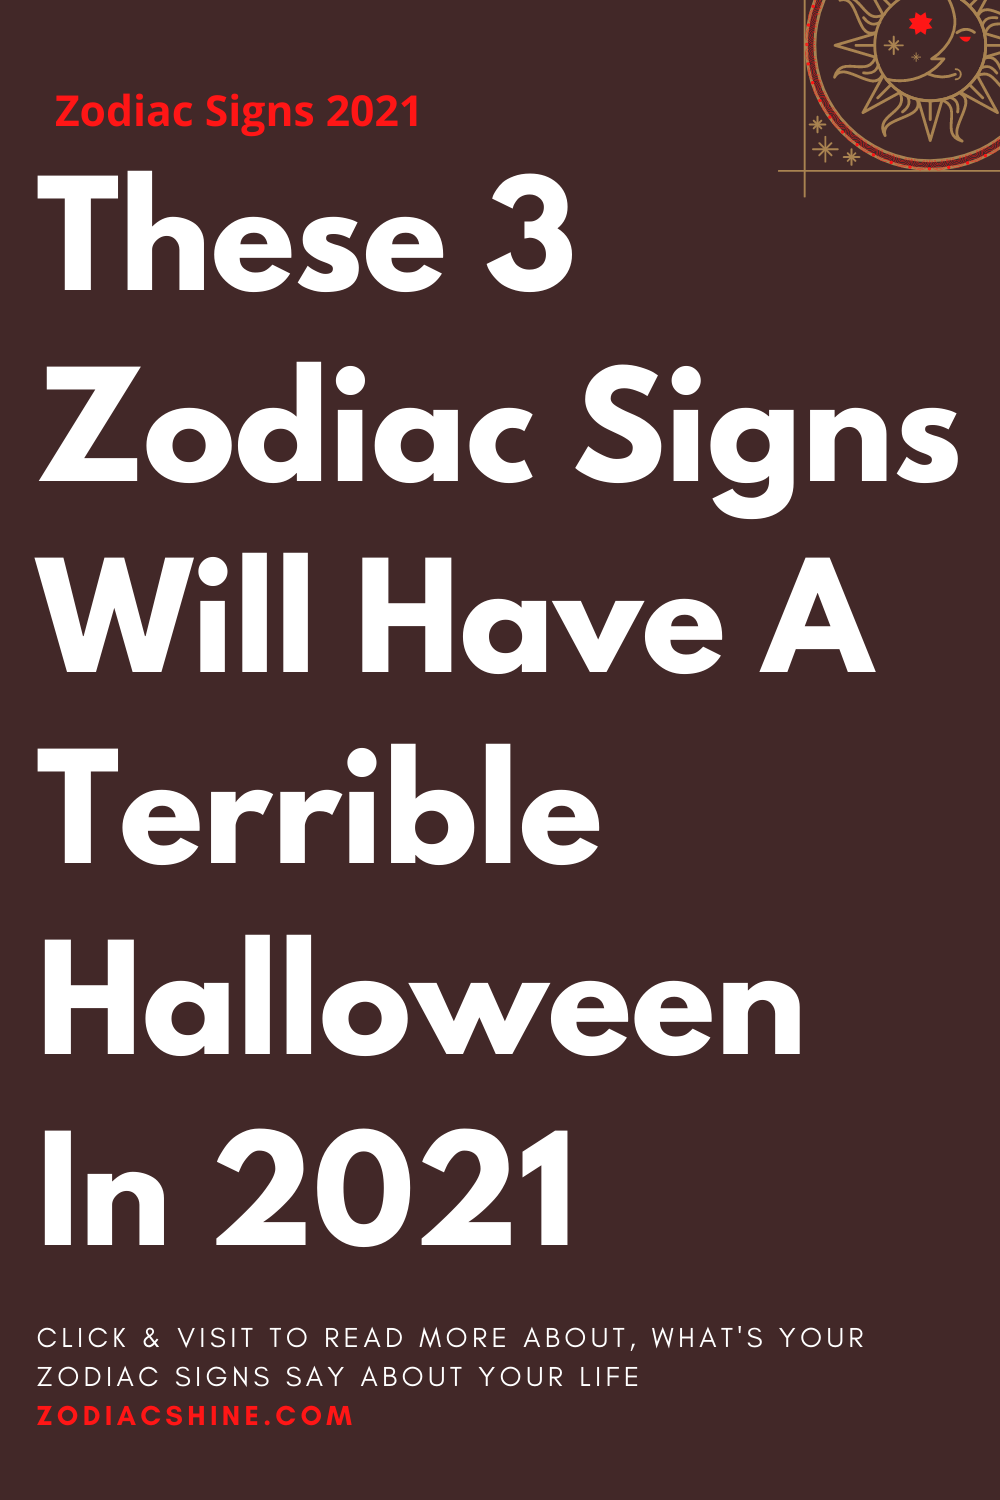 These 3 Zodiac Signs Will Have A Terrible Halloween In 2021